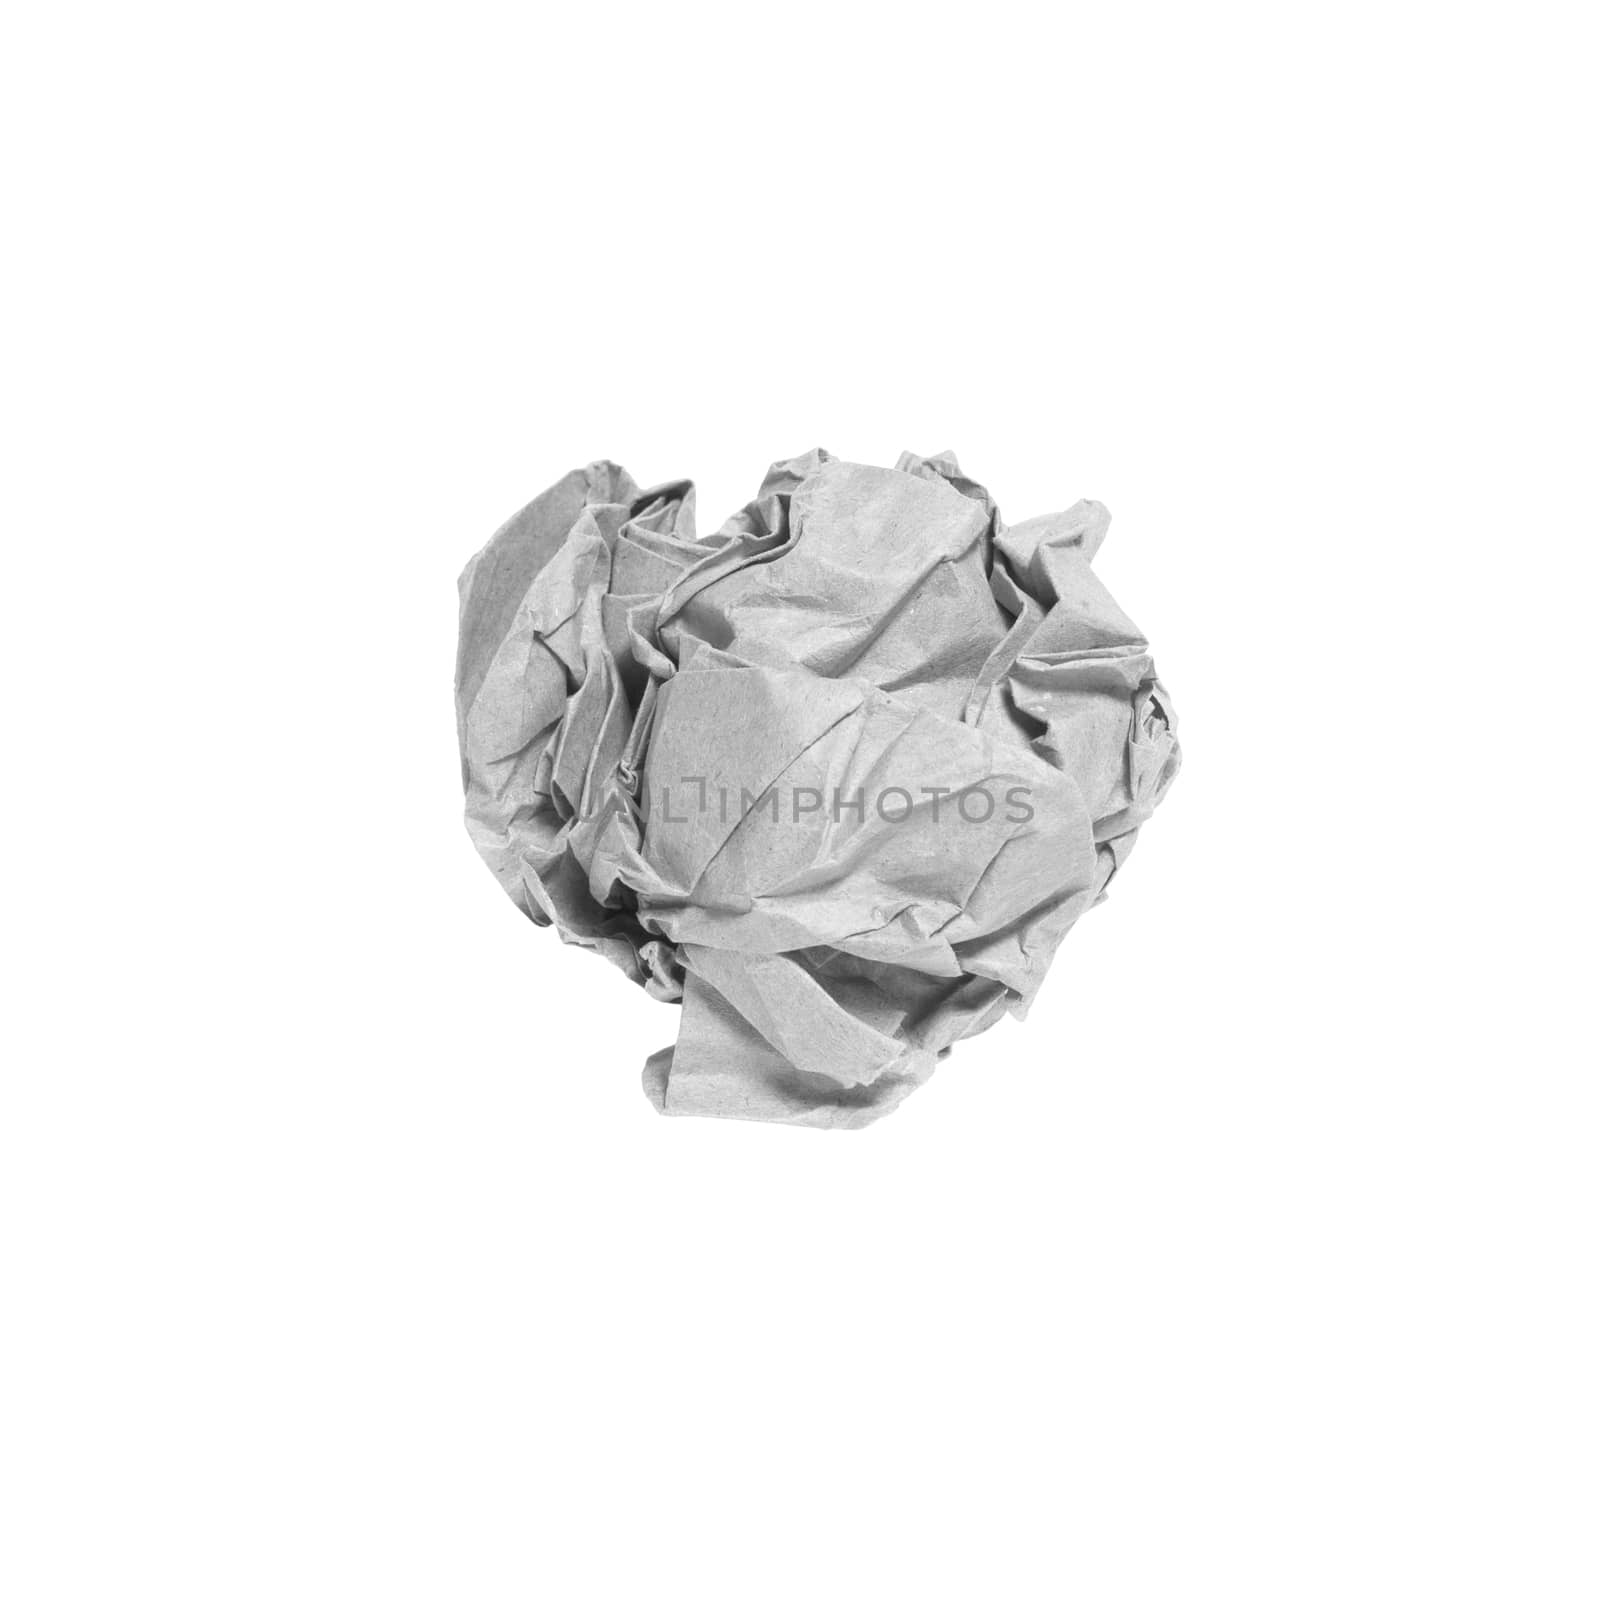 Crumpled gray paper ball isolated over white background by SlayCer